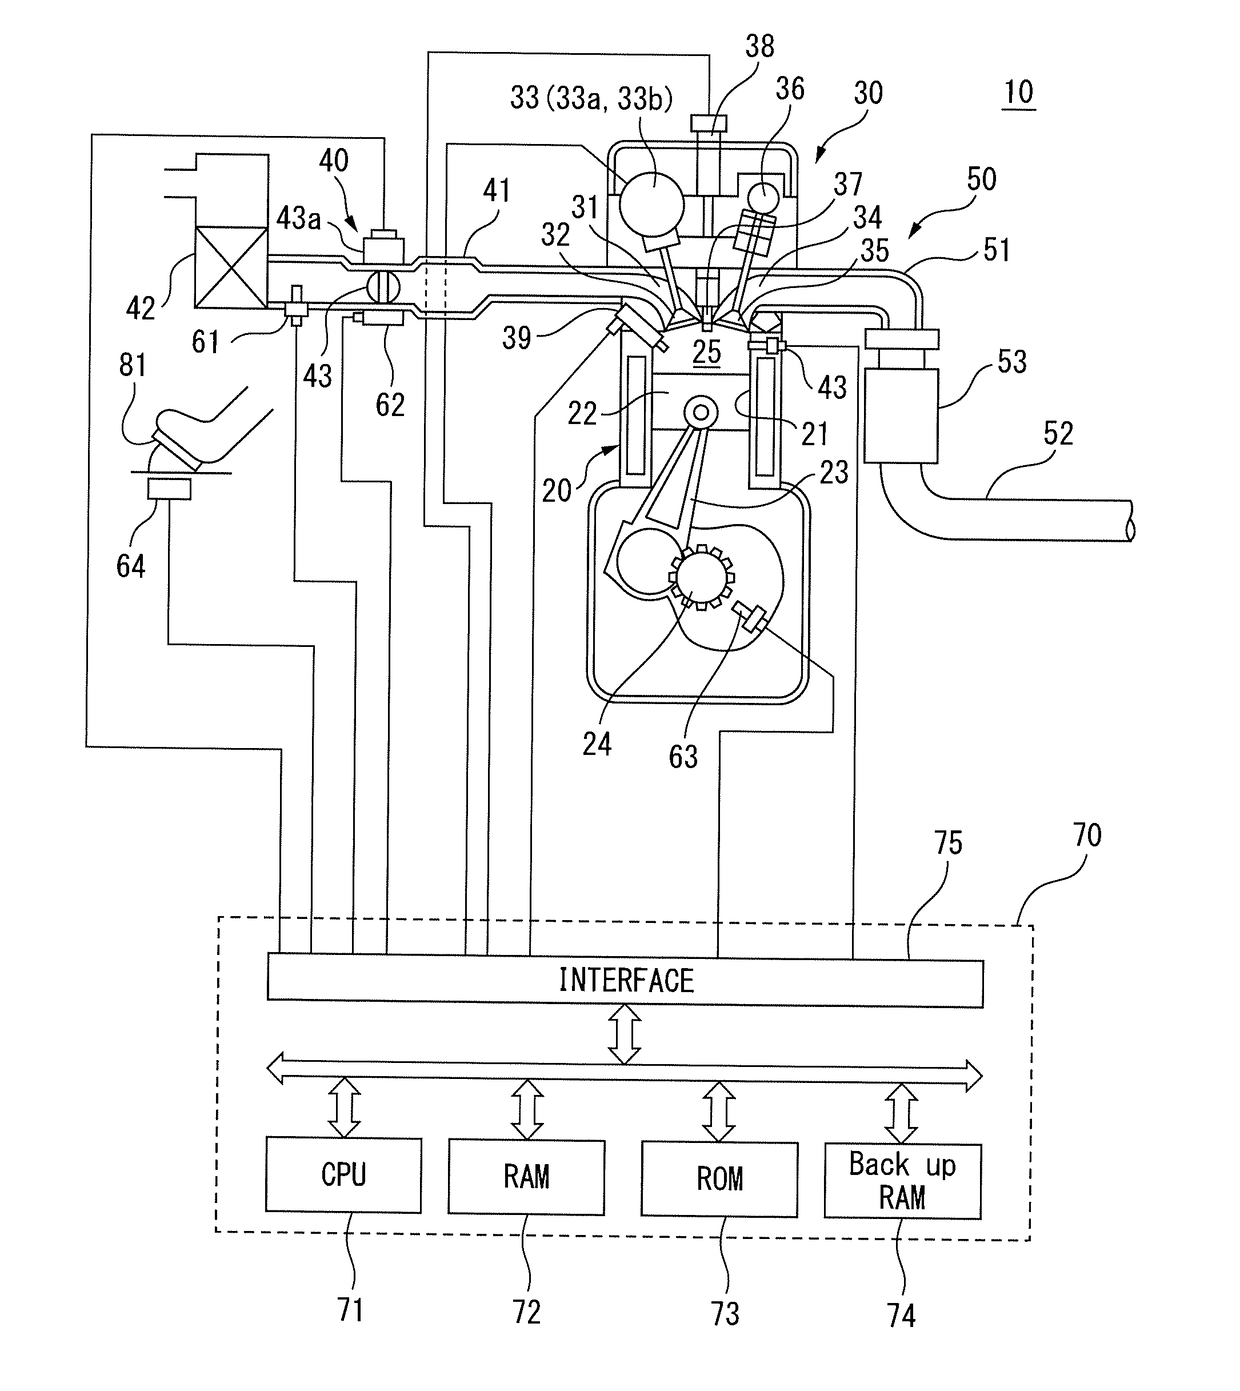 Control system of internal combustion engine